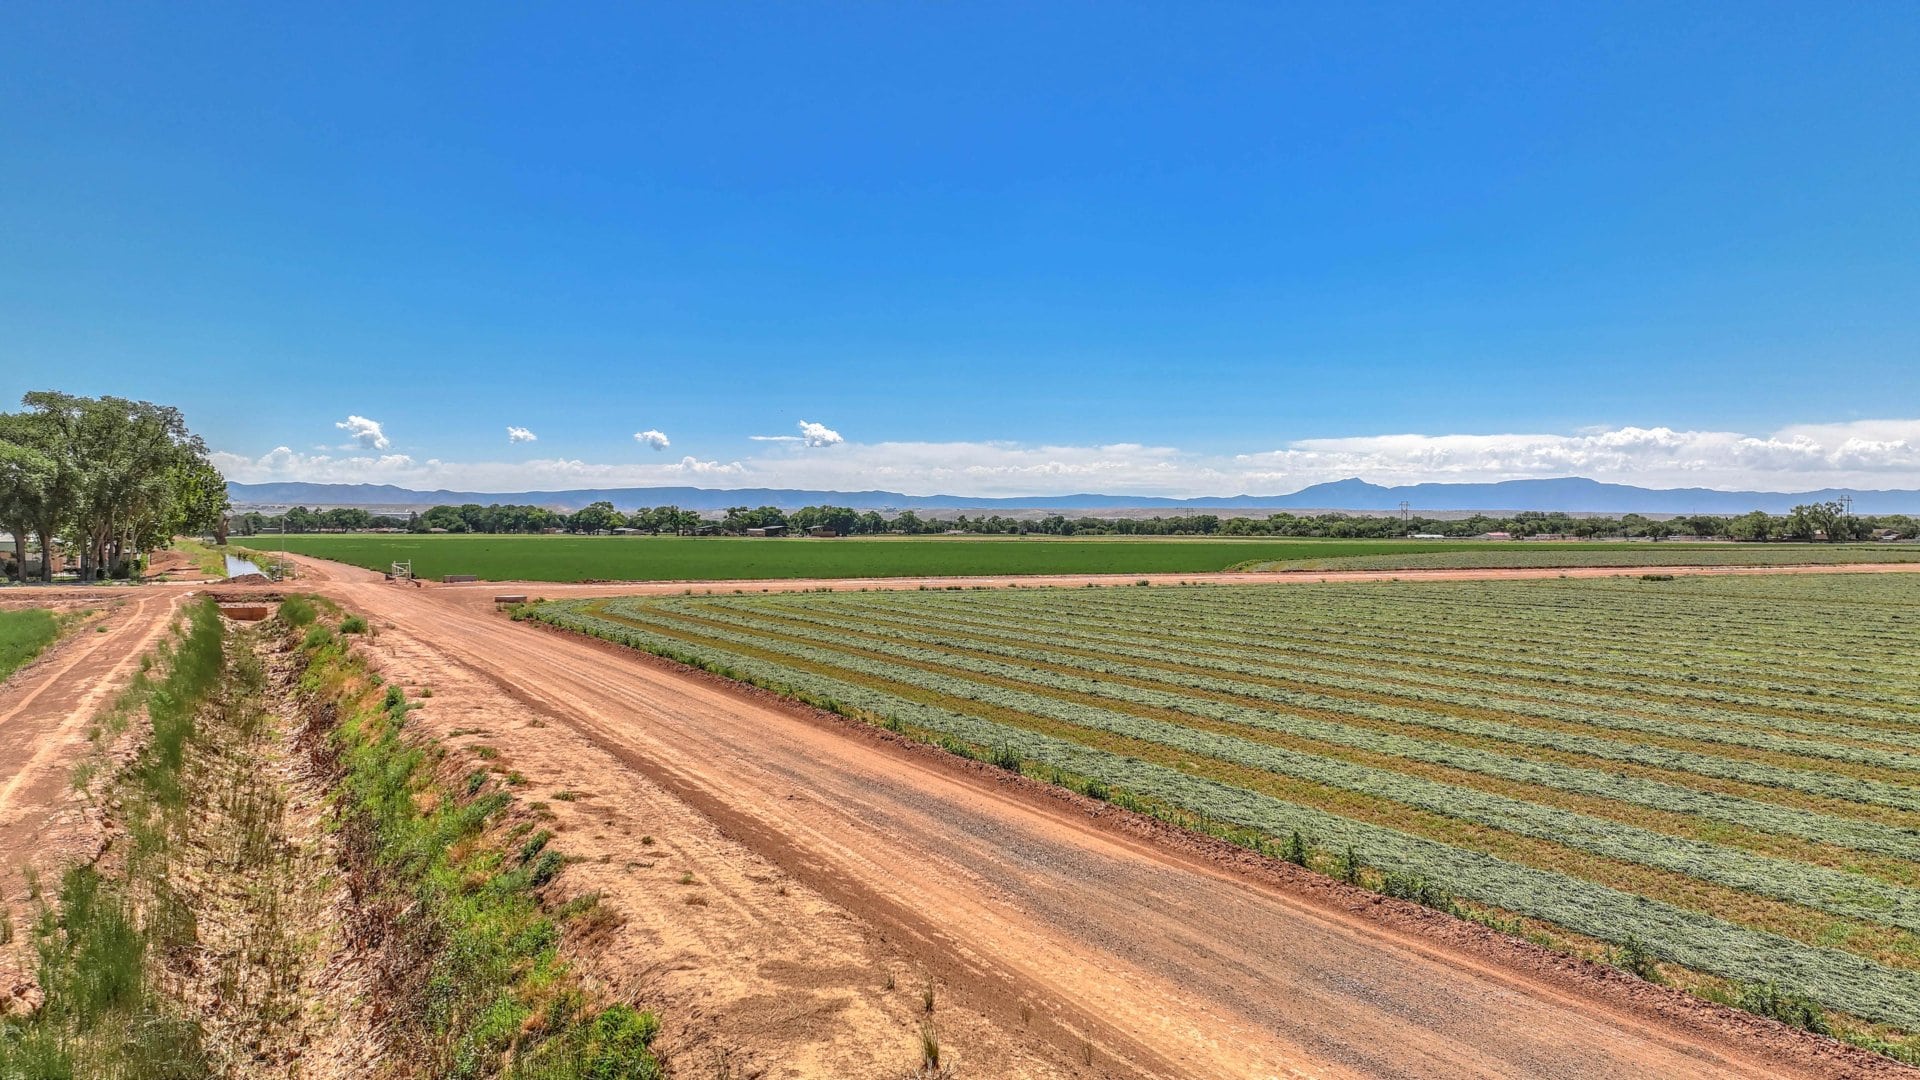 irrigation ditches new mexico old tobacco farm